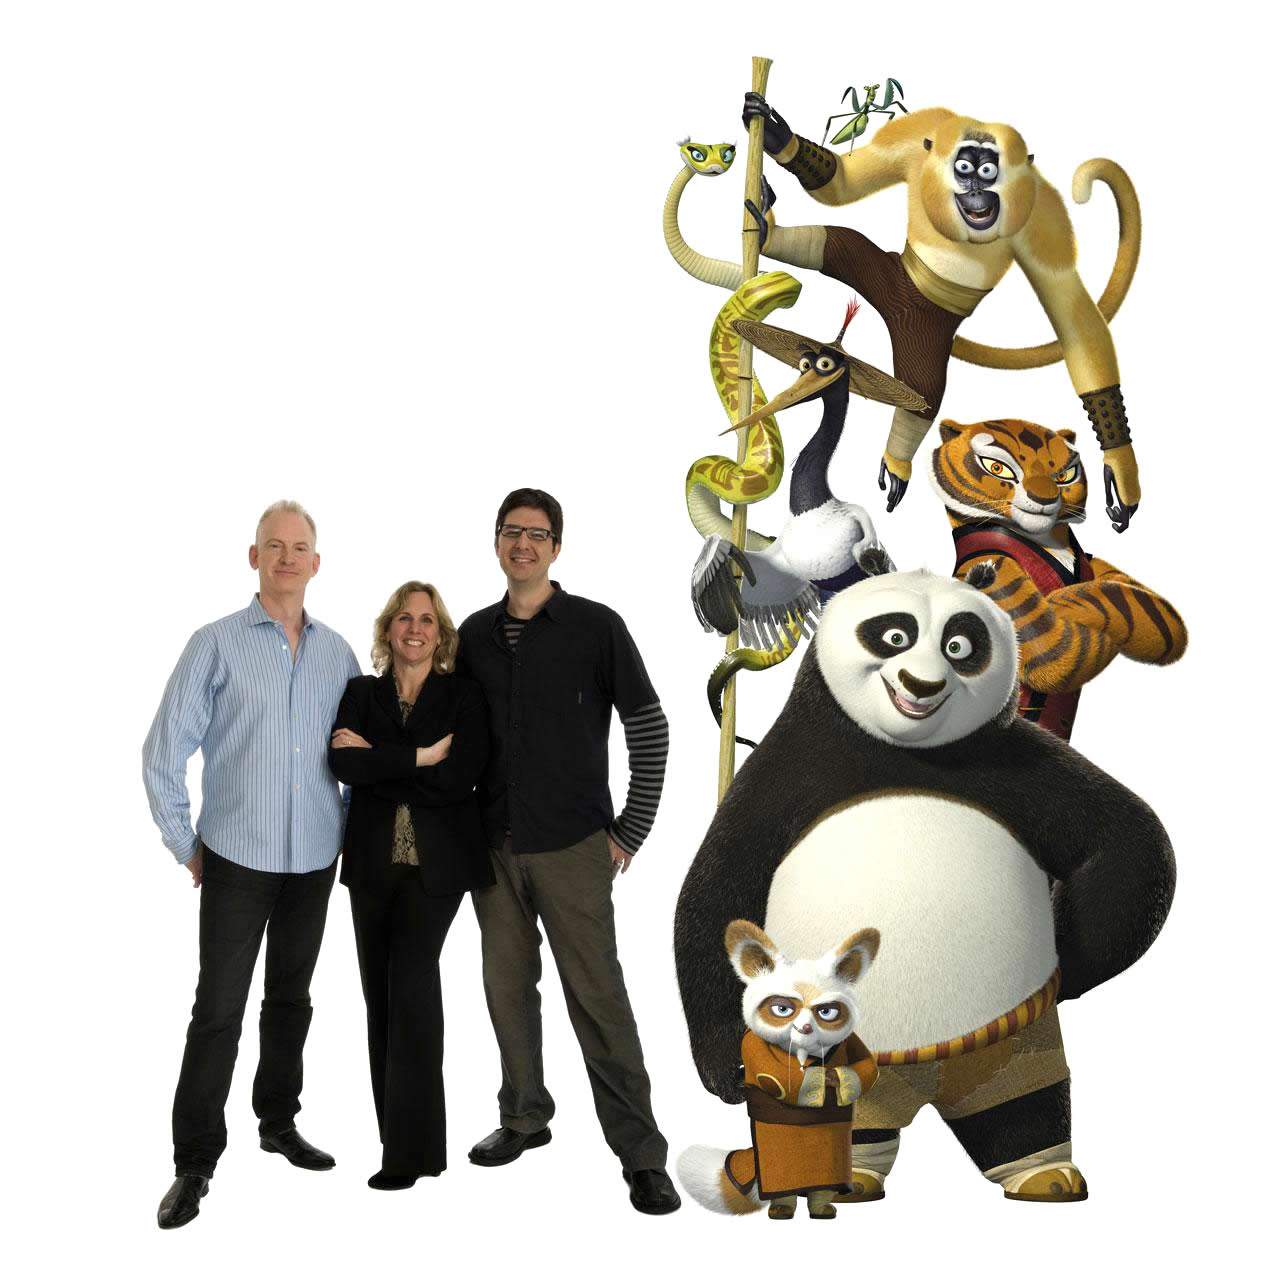 (L-R) Director JOHN STEVENSON, producer MELISSA COBB and director MARK OSBORNE, along with some of their animated cast of DreamWorks' Kung Fu Panda (2008). Photo by Patrick Ecclesine.